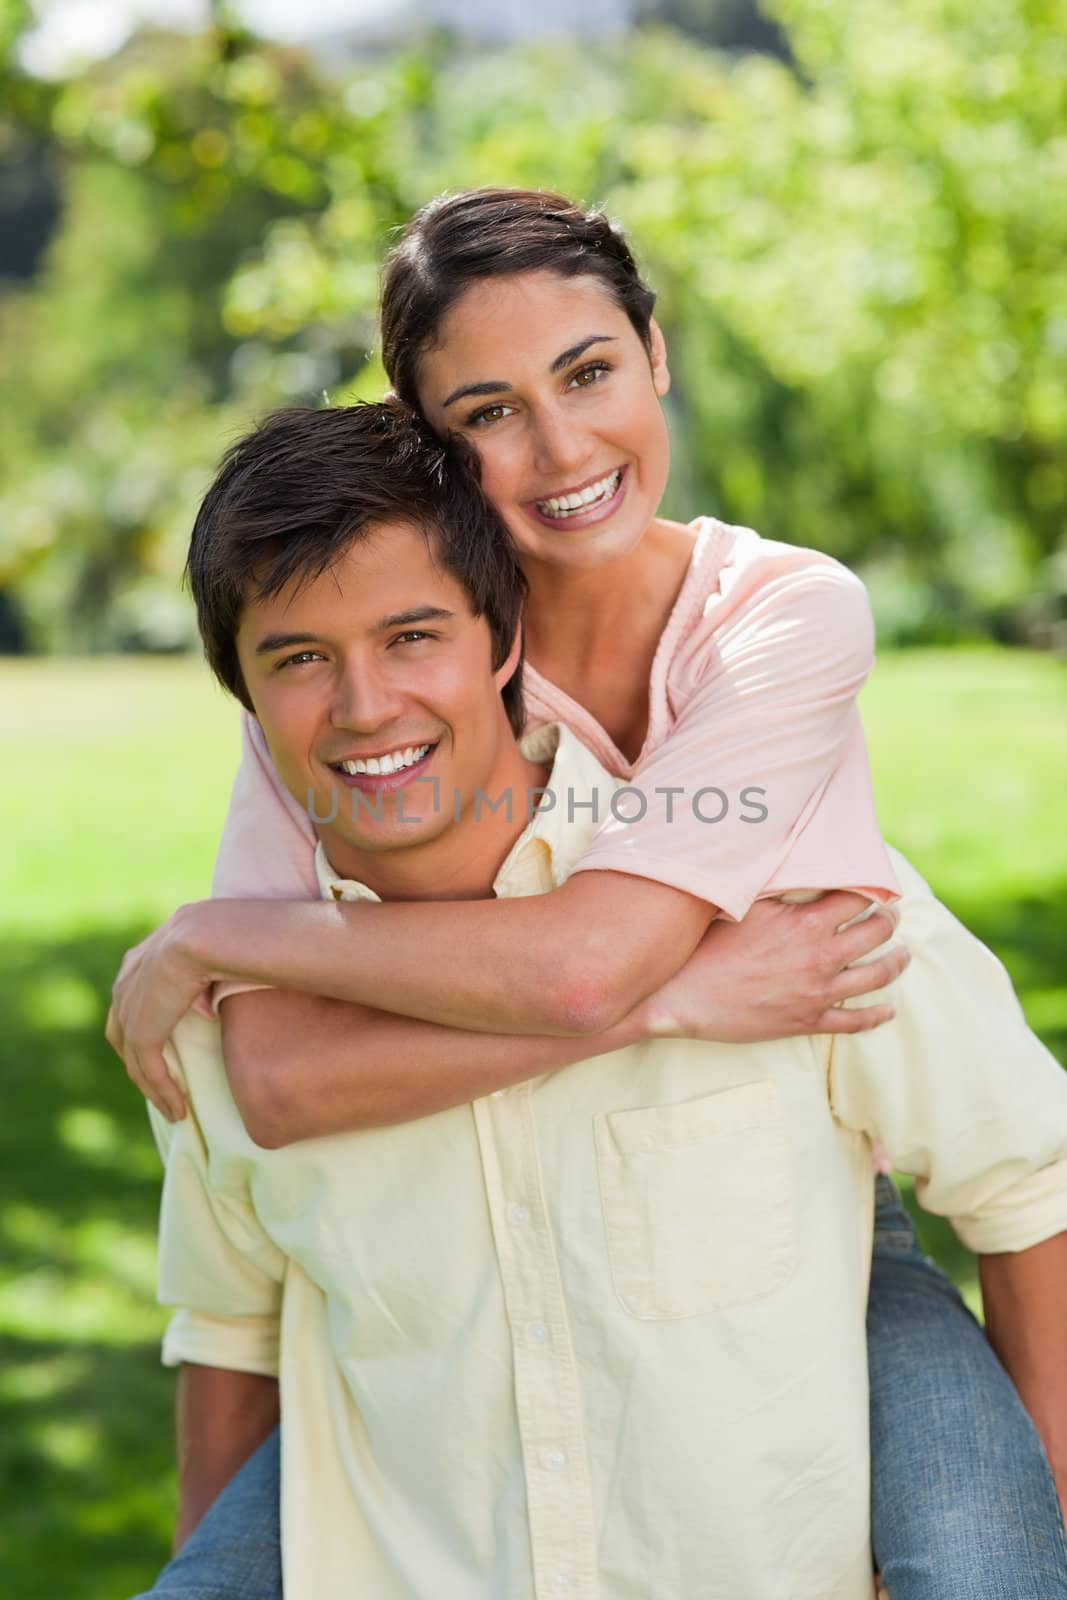 Woman smiling while looking in front of her as she is being carried bey her friend in a park